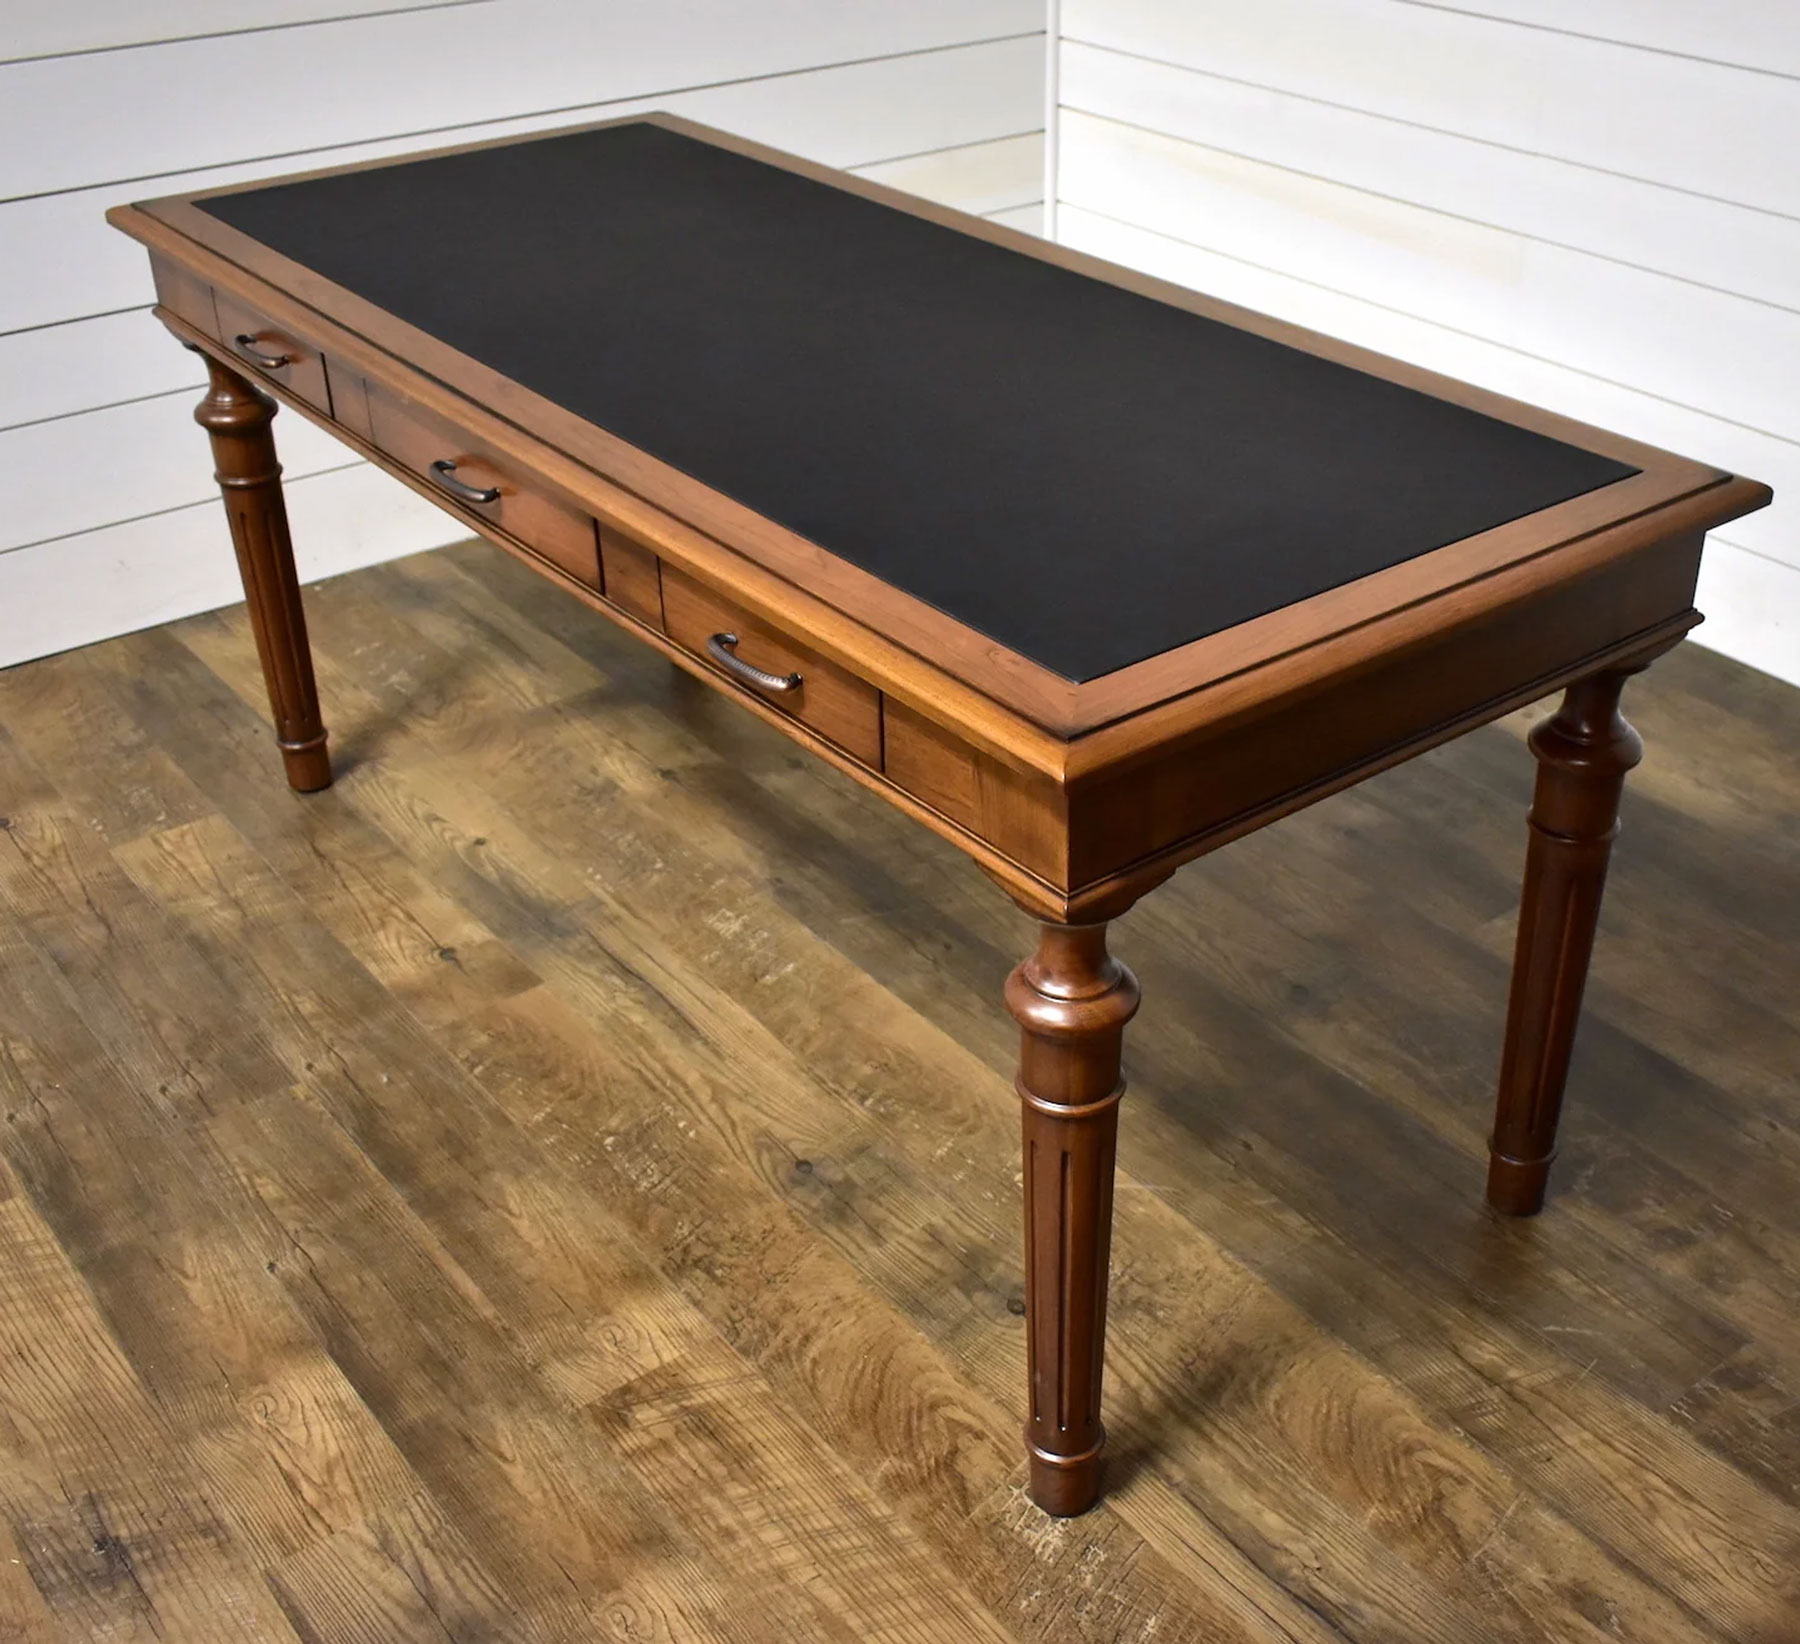 Kingston 1800 Library Table in Cherry with Leather Inlay